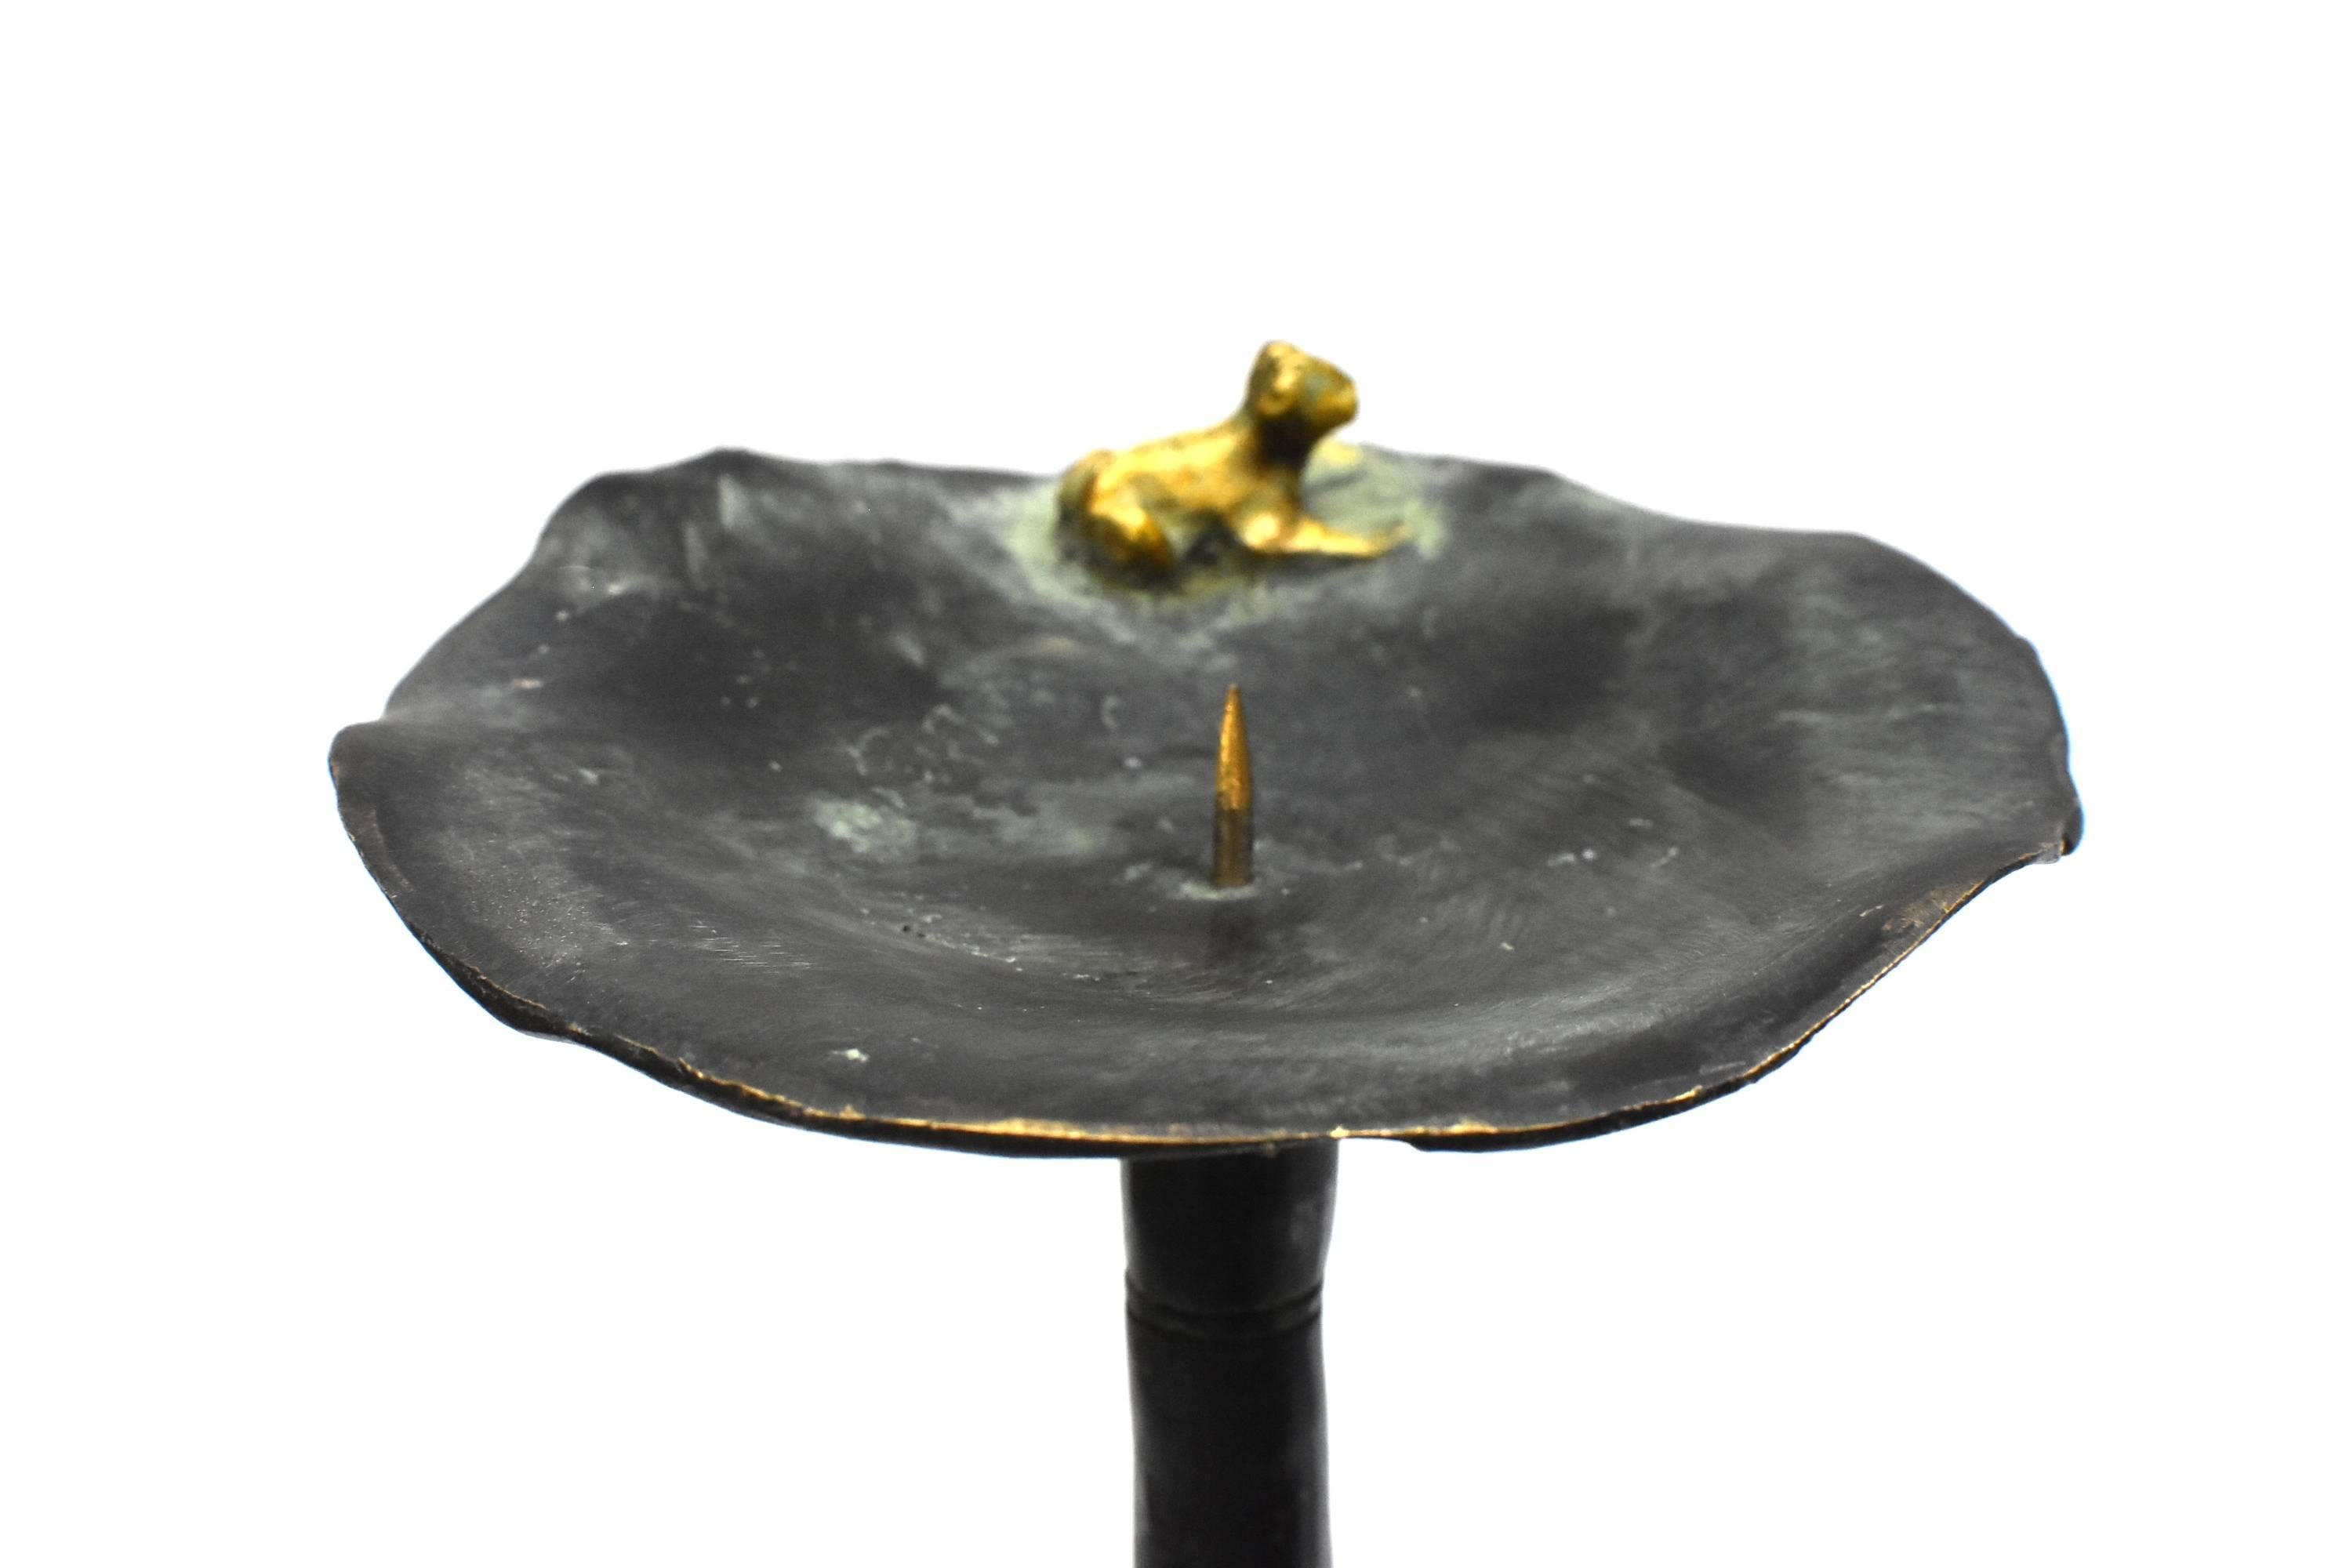 A beautiful, one of a kind, bronze candelabra. Scalloped edged lotus leave with a frog perched on top makes the piece come alive. Bamboo bodice intercepted by lotus flowers provide visual interest. Three footed bases anchored by beast motifs provide